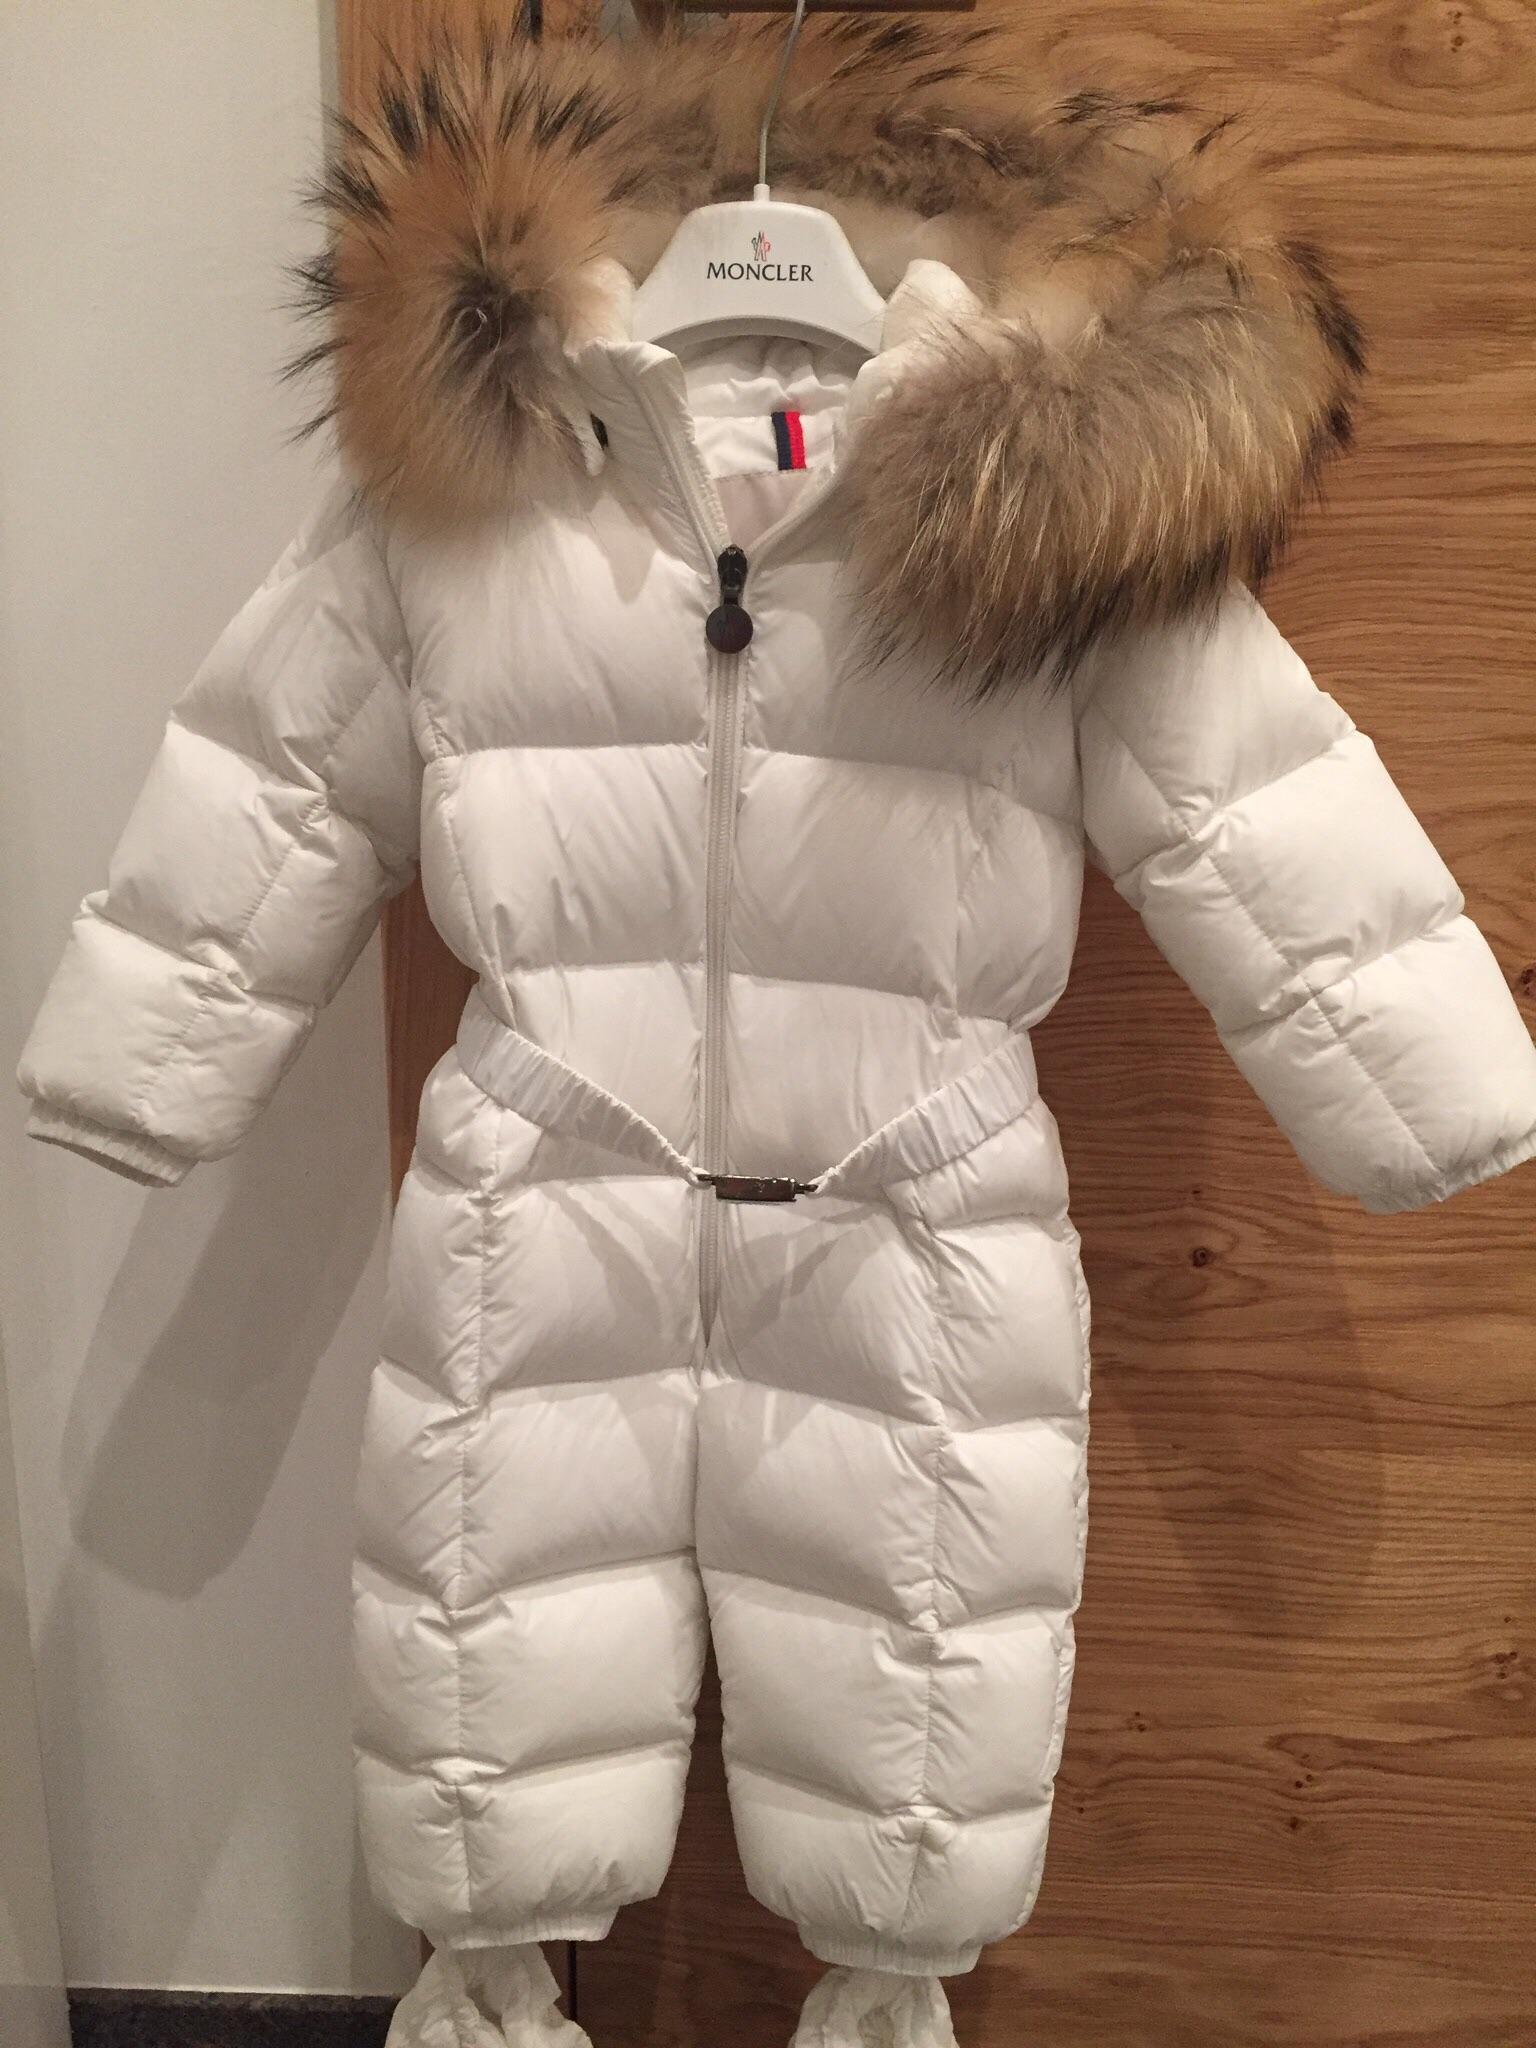 Moncler Schneeanzug gr.12/18 m in 6060 Hall in Tirol for €250.00 for sale |  Shpock